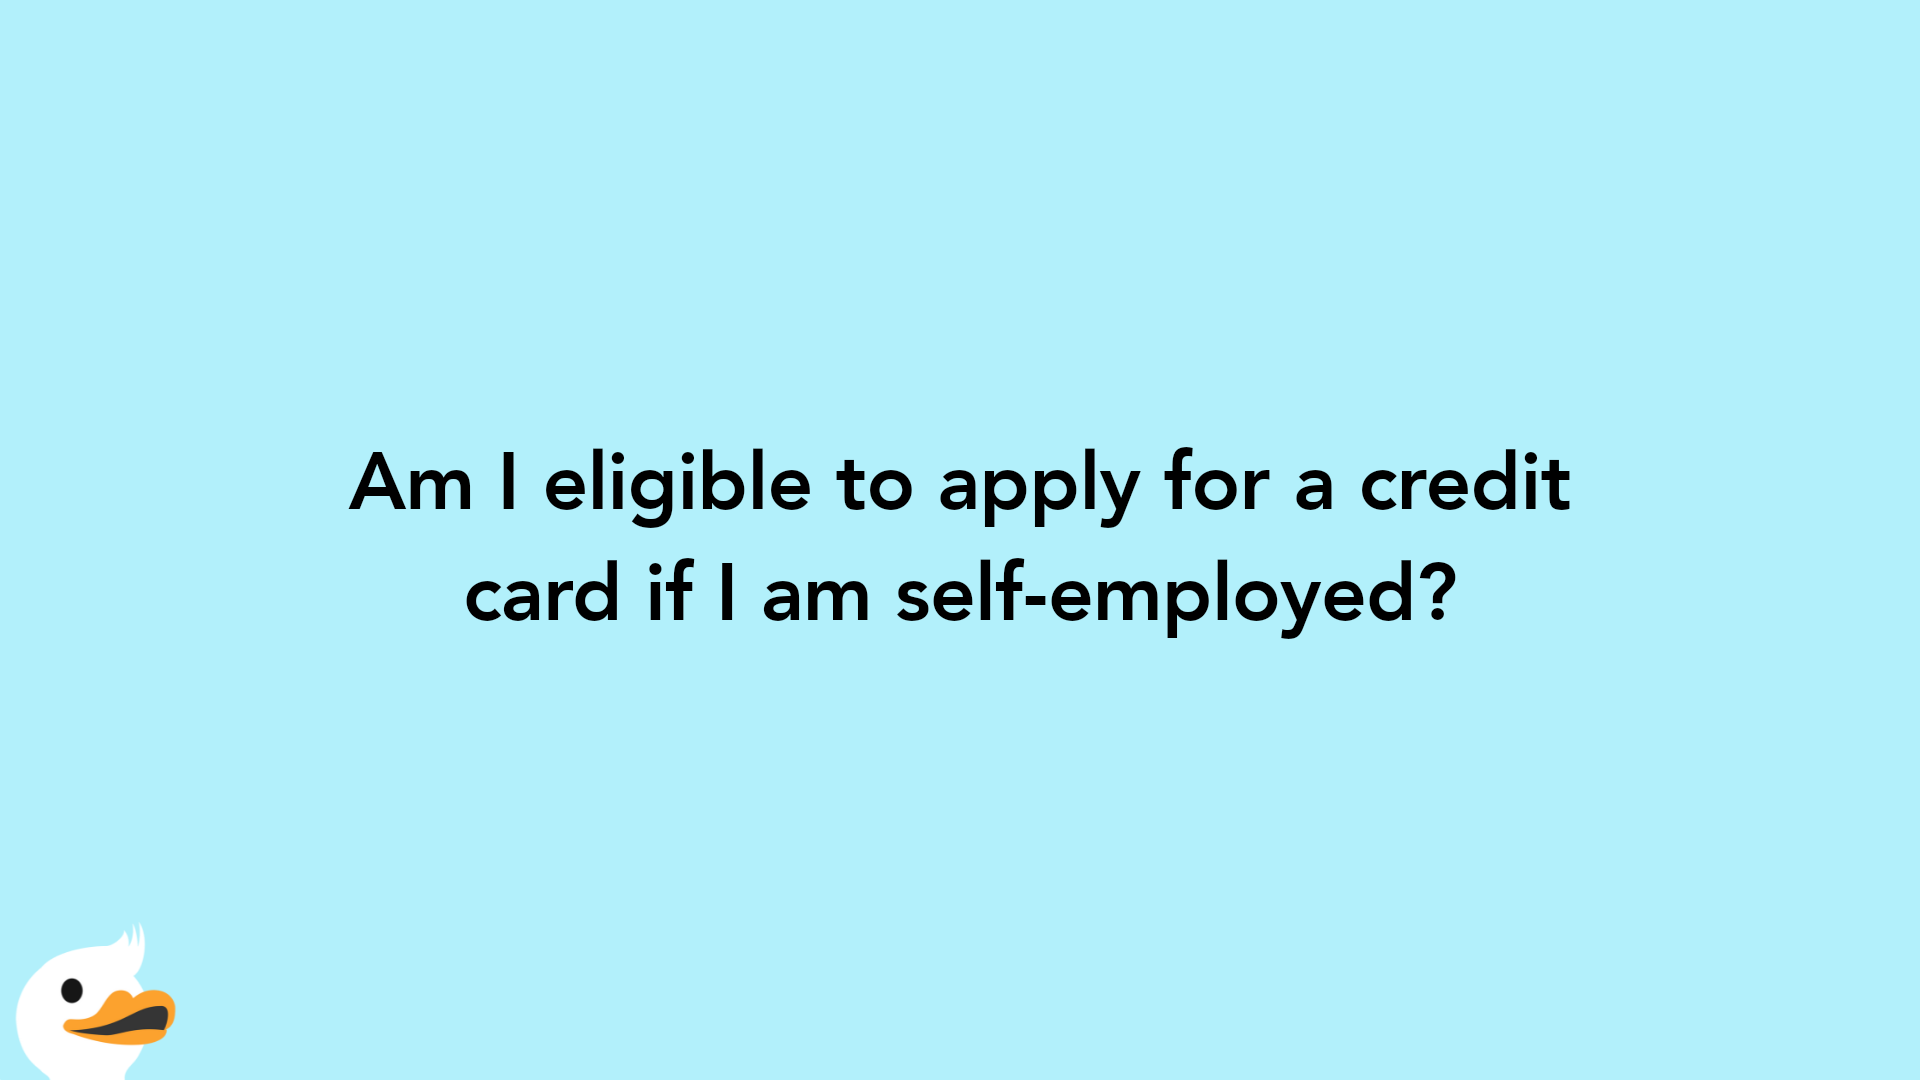 Am I eligible to apply for a credit card if I am self-employed?